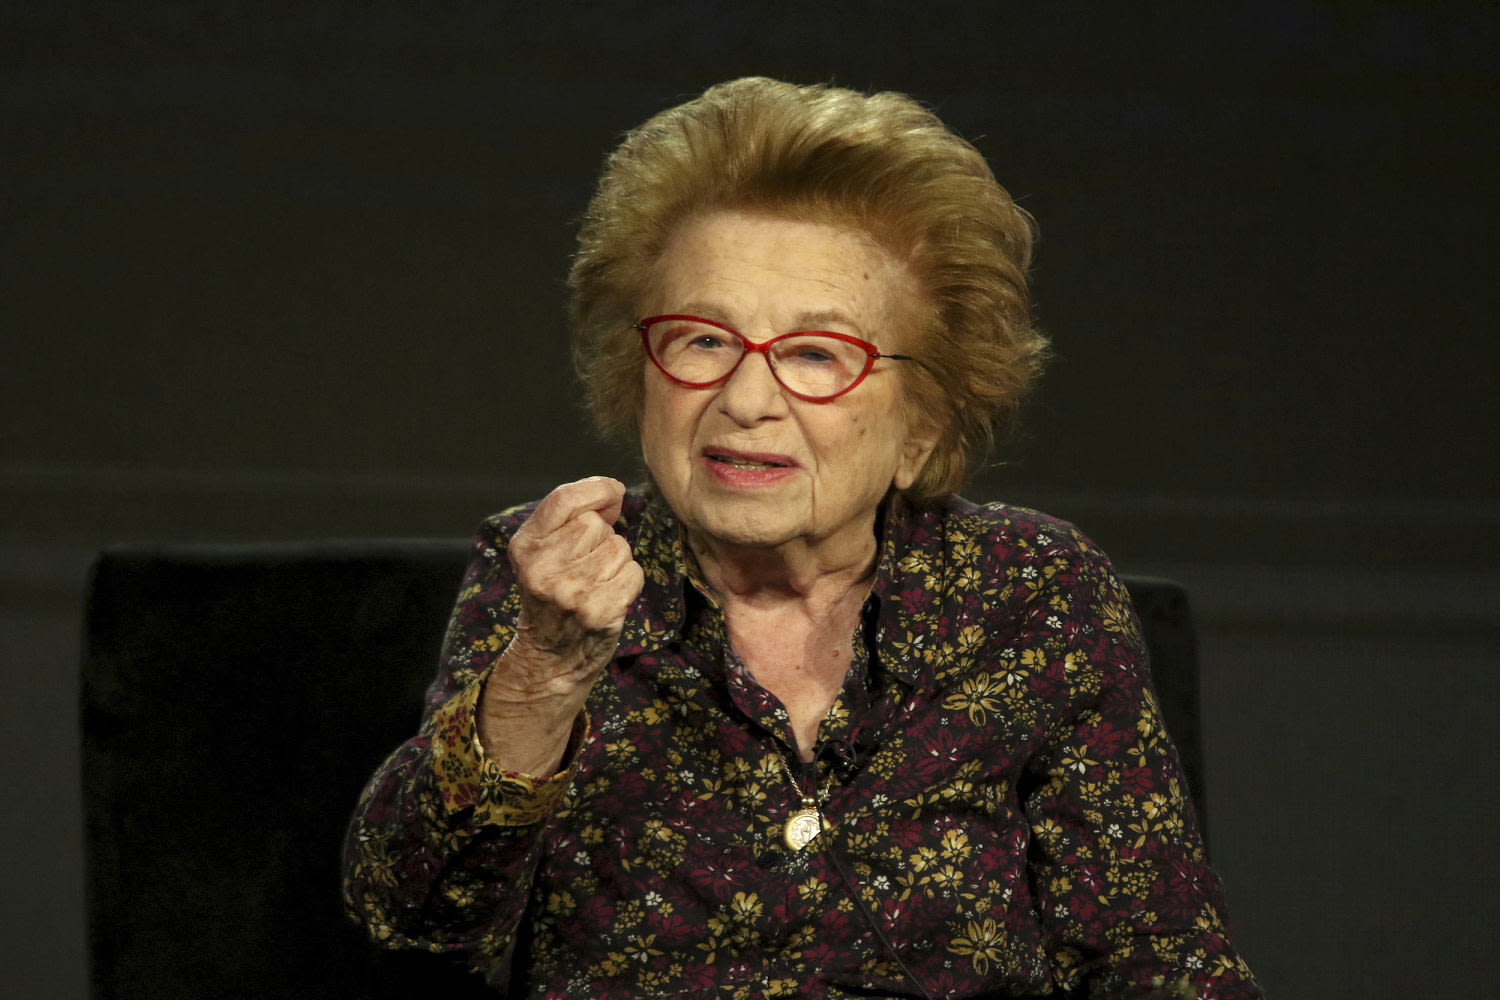 Dr. Ruth Westheimer, celebrity therapist who revolutionized public discourse on sex, dead at 96